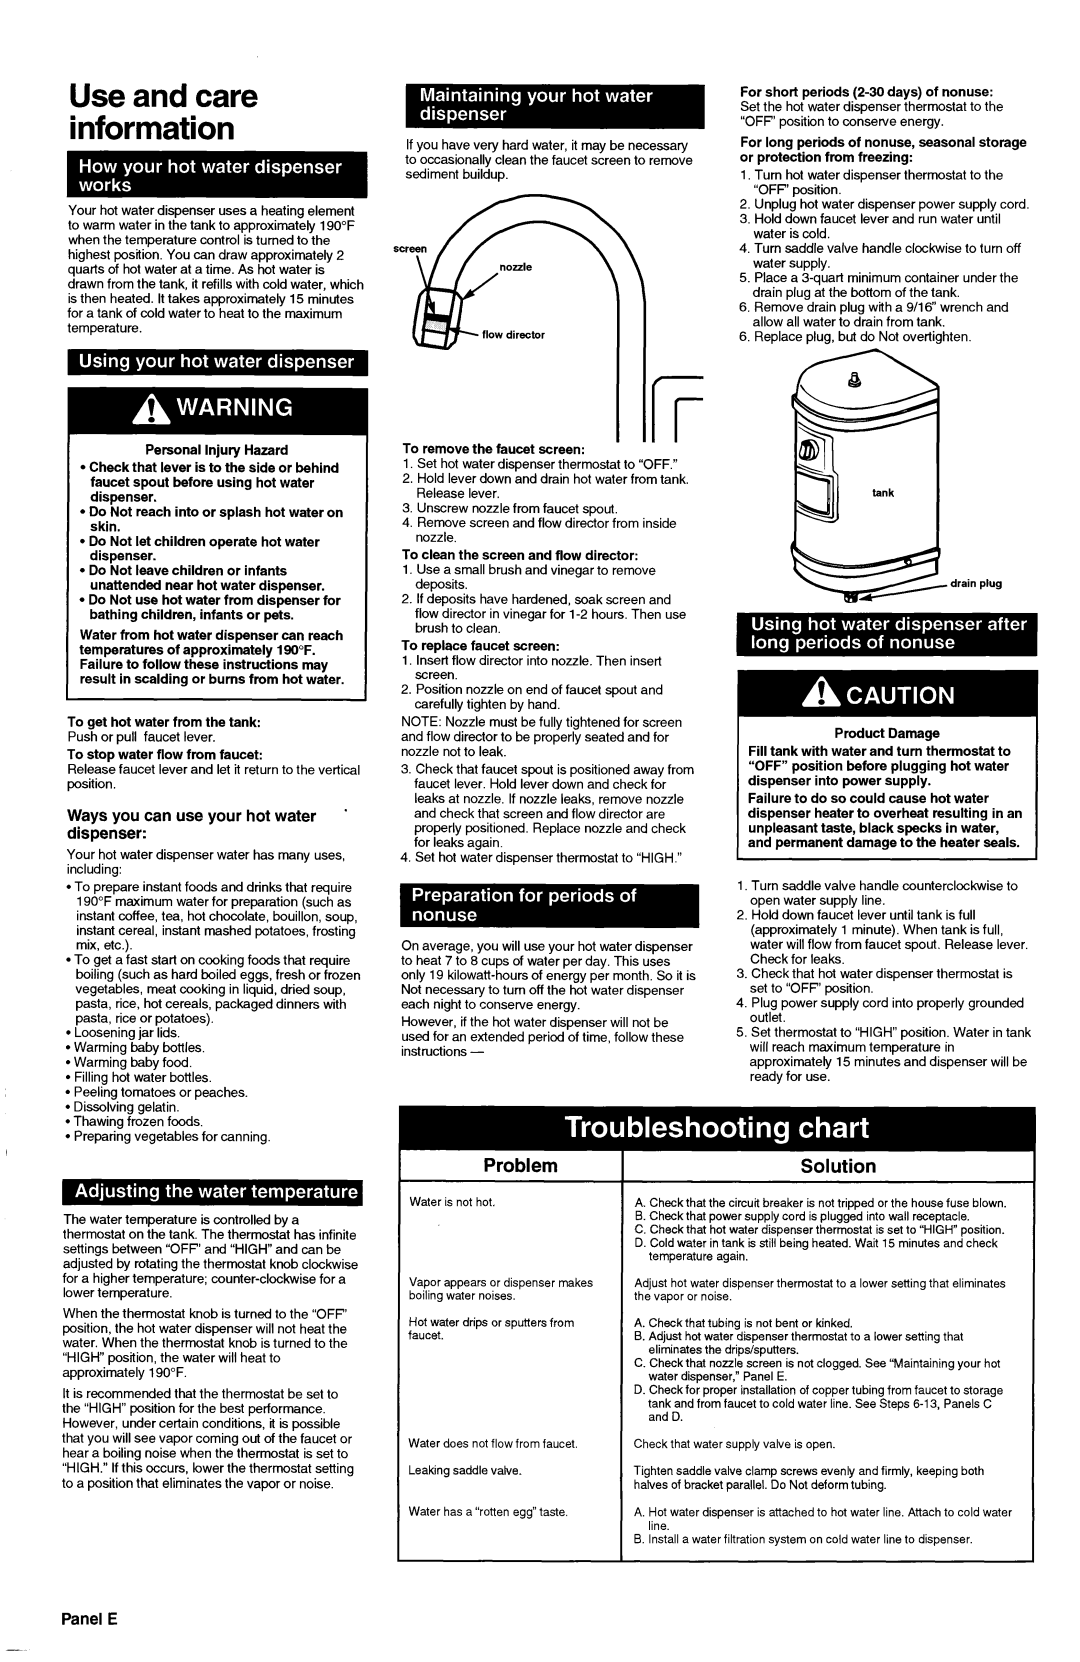 KitchenAid 3184330 Ways you can use your hot water ’ dispenser, Panel E, Use and care information, Problem, Solution 